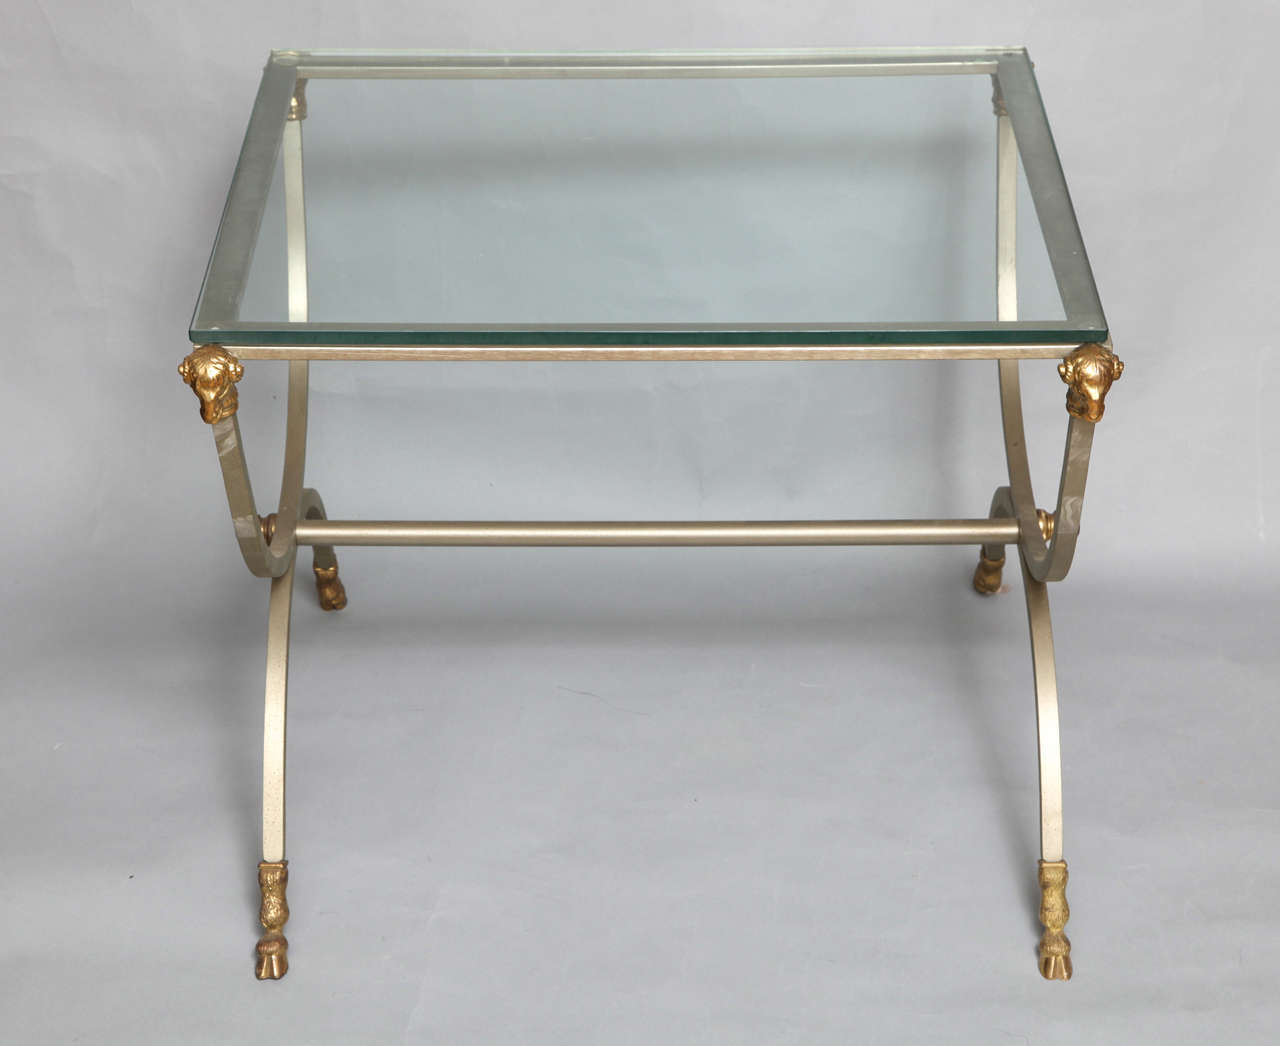 A square French steel and gilt bronze side table in the manner of Maison Jansen with X-shaped sides split hooved bronze feet and ram's heads.